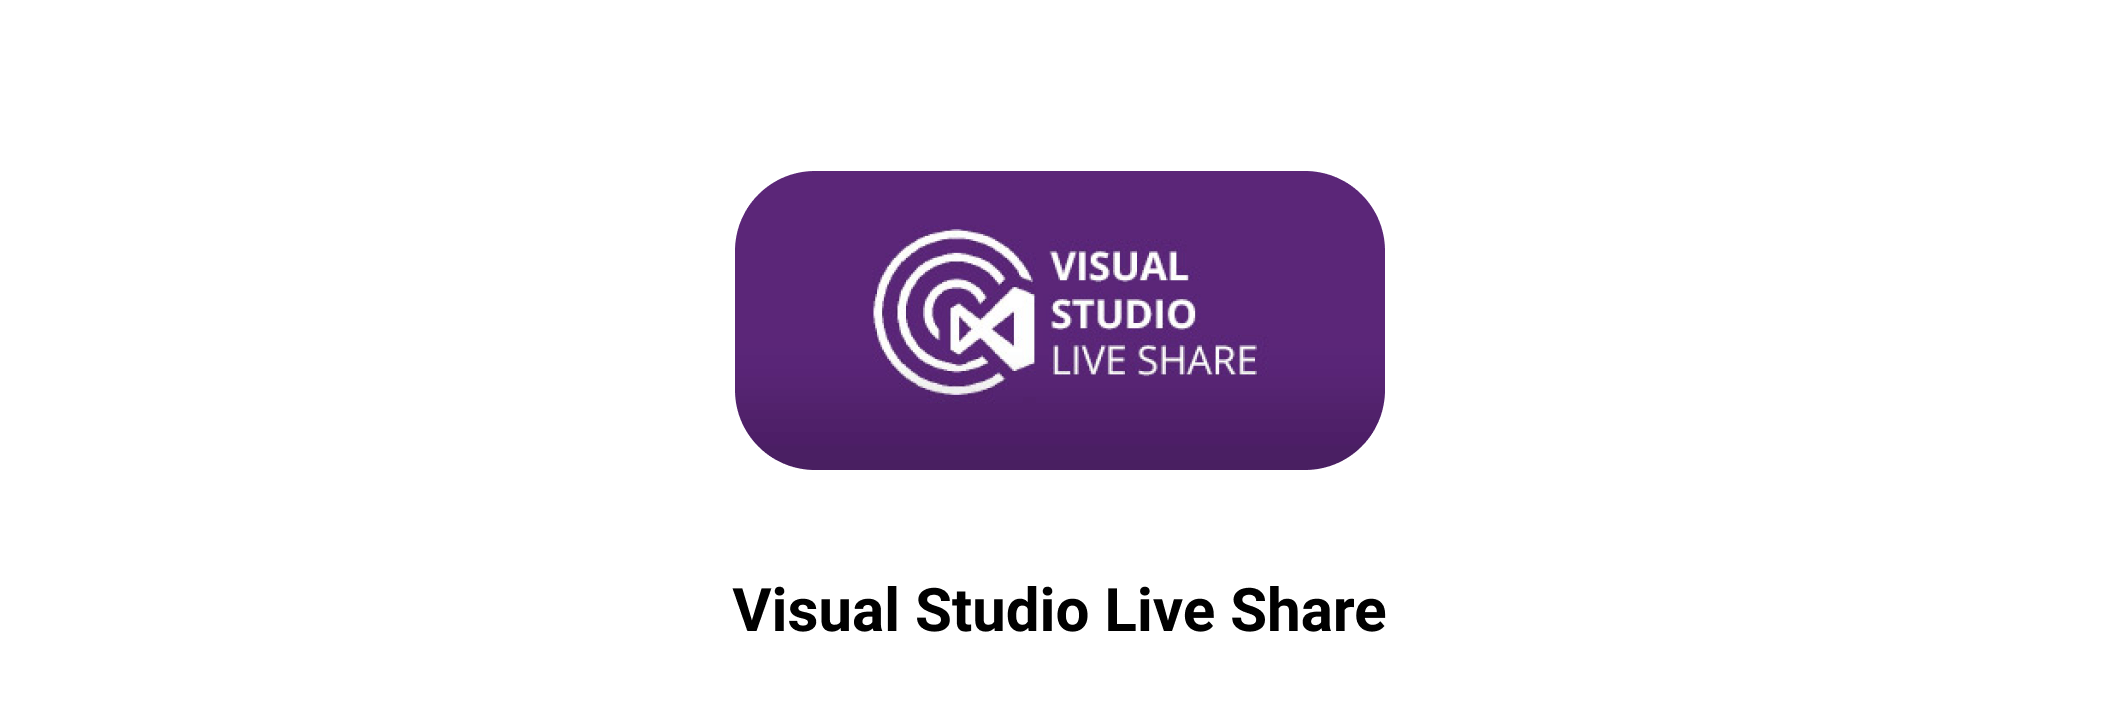 Best Android Development Tools Visual Studio Live Share